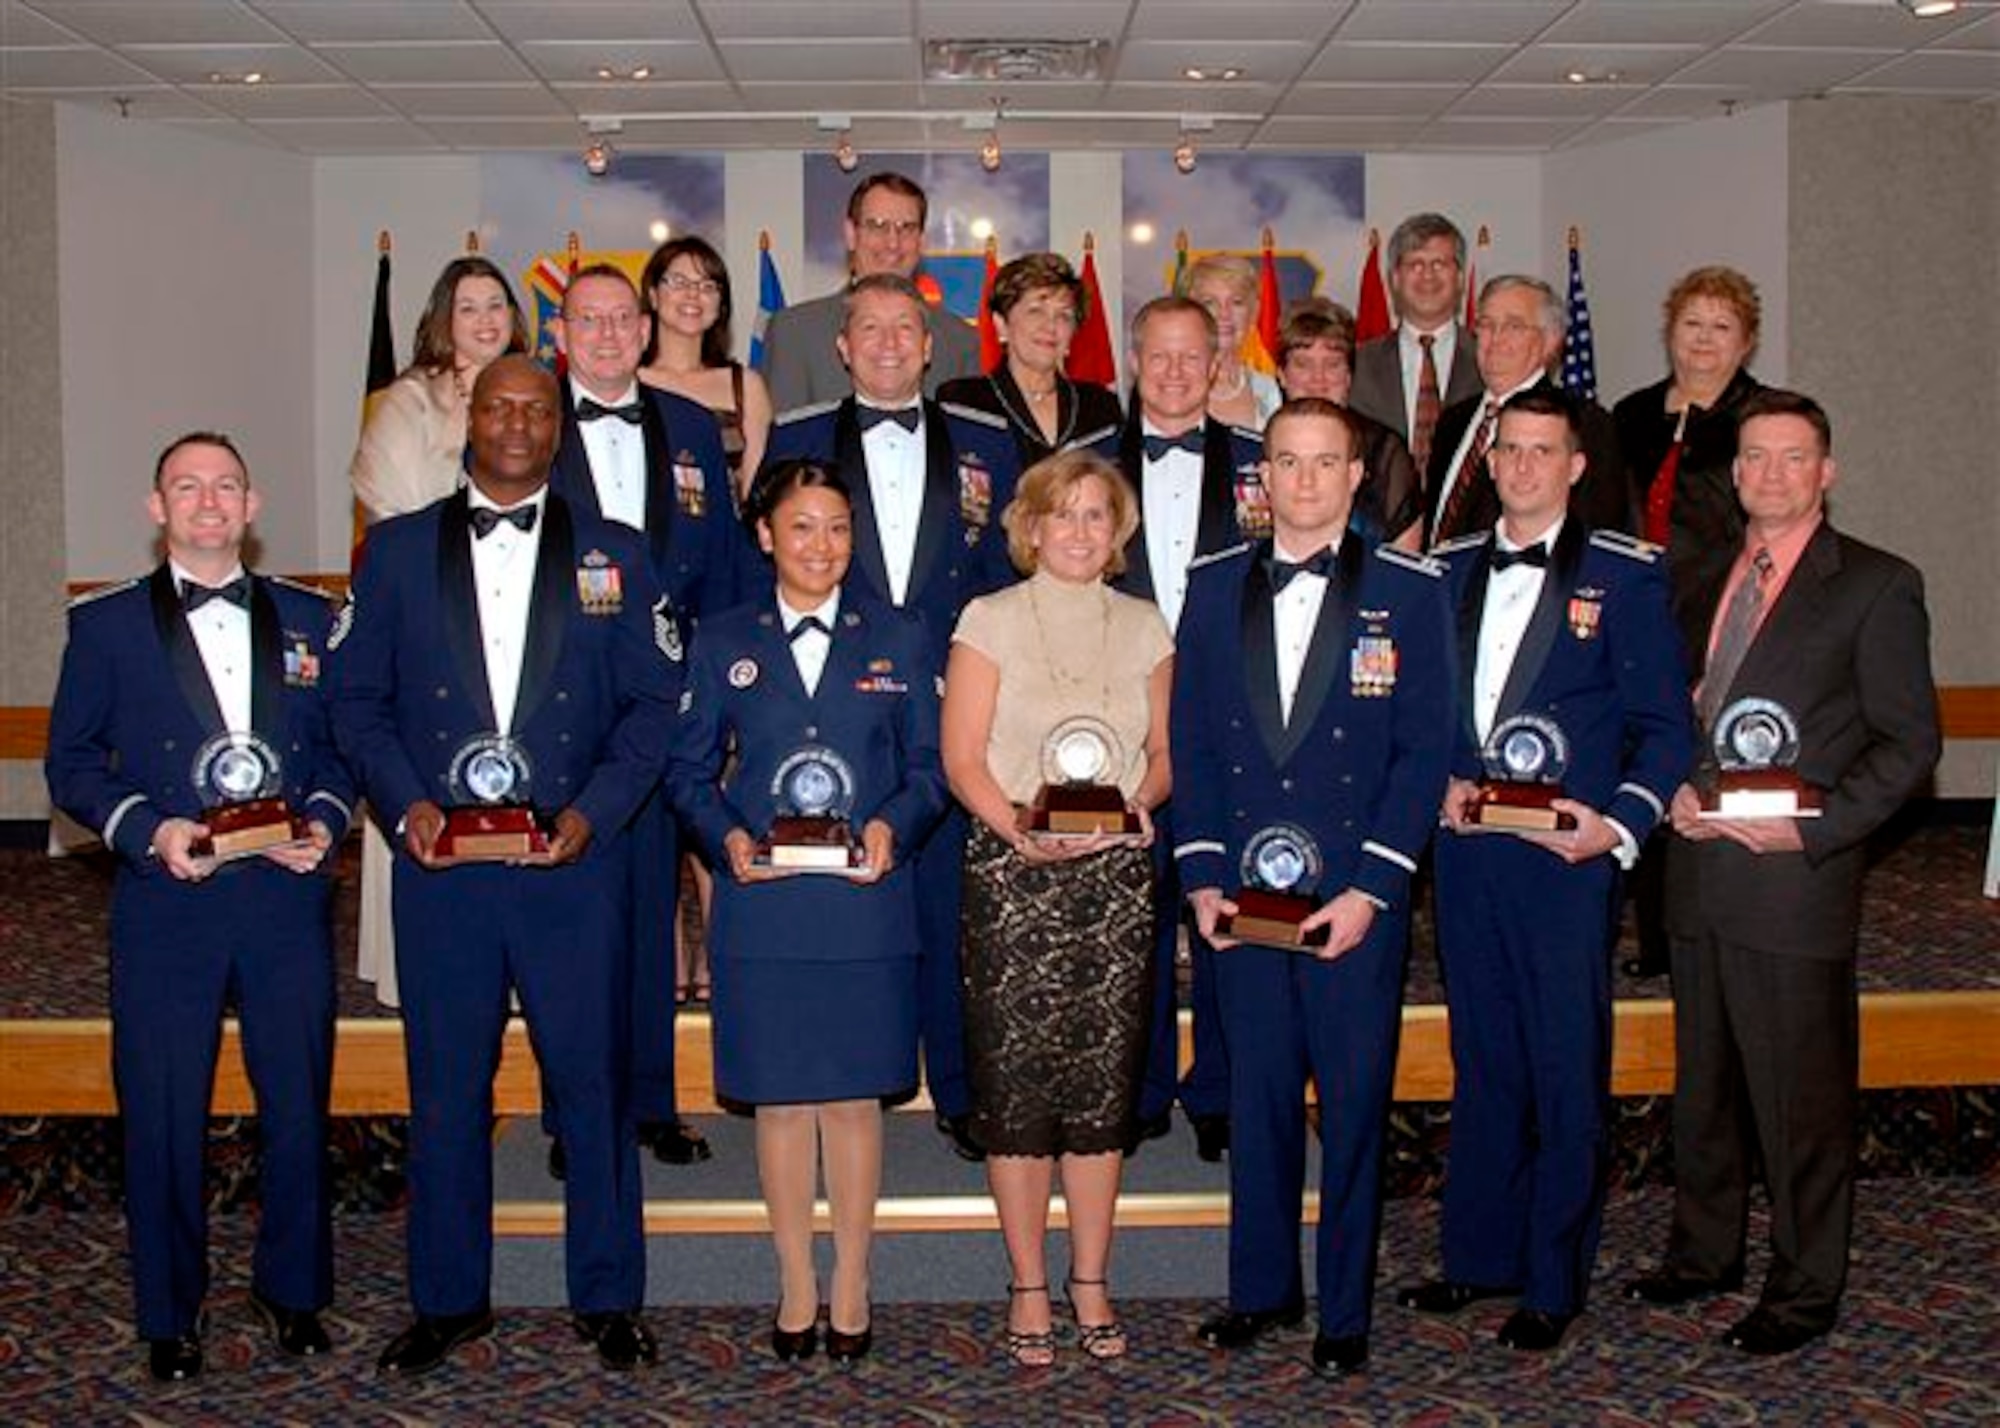 Col. David Petersen, 80th Flying Training Wing commander, and Chief Master Sgt. Norman Thierolf, the wing's command chief, pose with the 80th FTW annual award winners as they show off the awards that their hard work has earned them. (U.S. Air Force photo) 